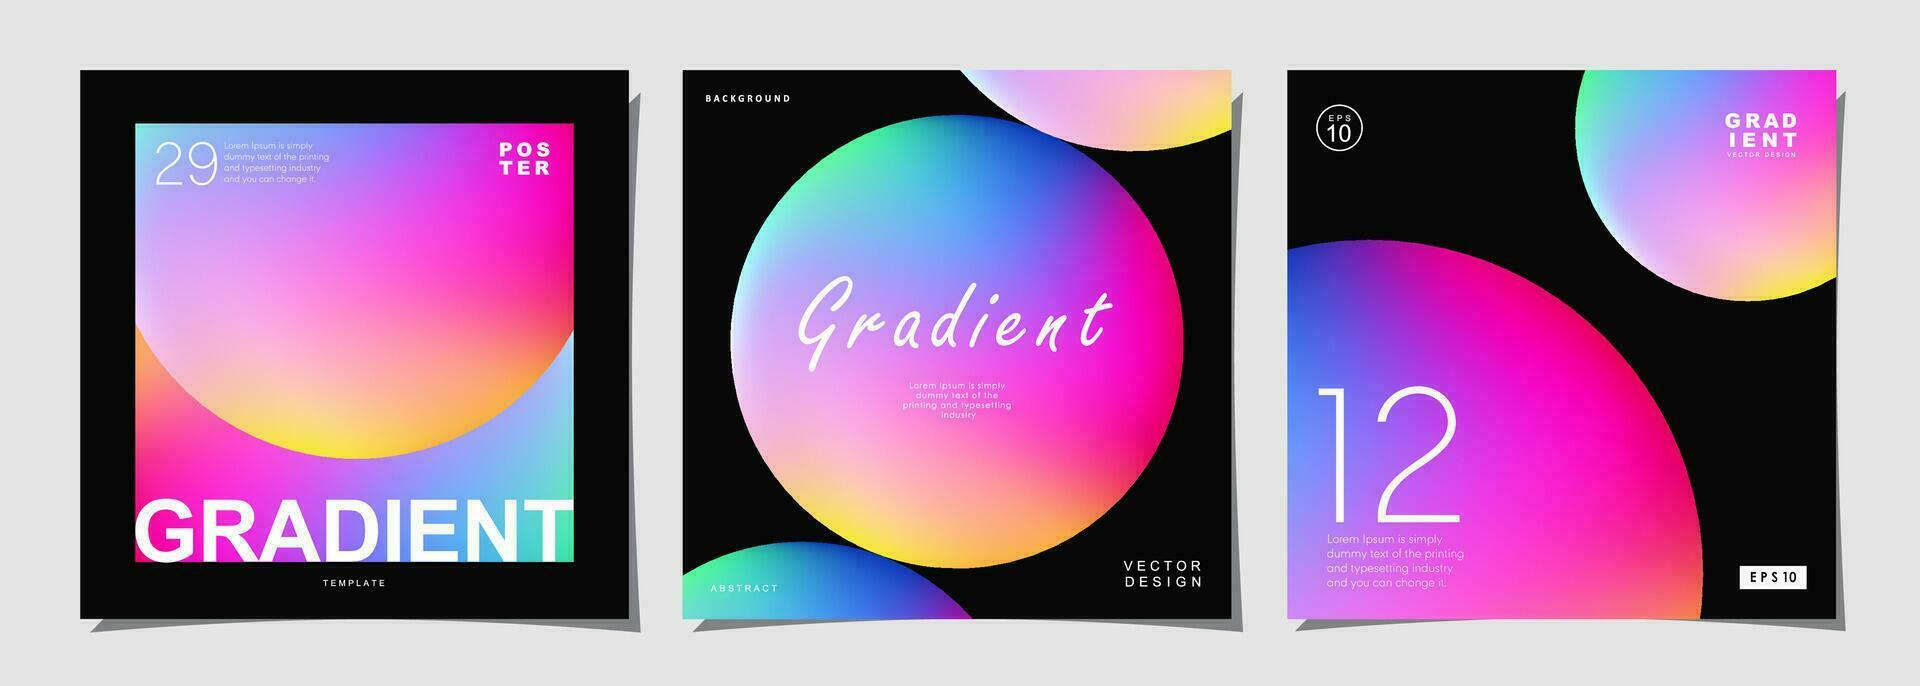 Set of creative covers or posters concept in modern minimal style for corporate identity, branding, social media advertising, promo. Circle design template with dynamic fluid gradient. vector